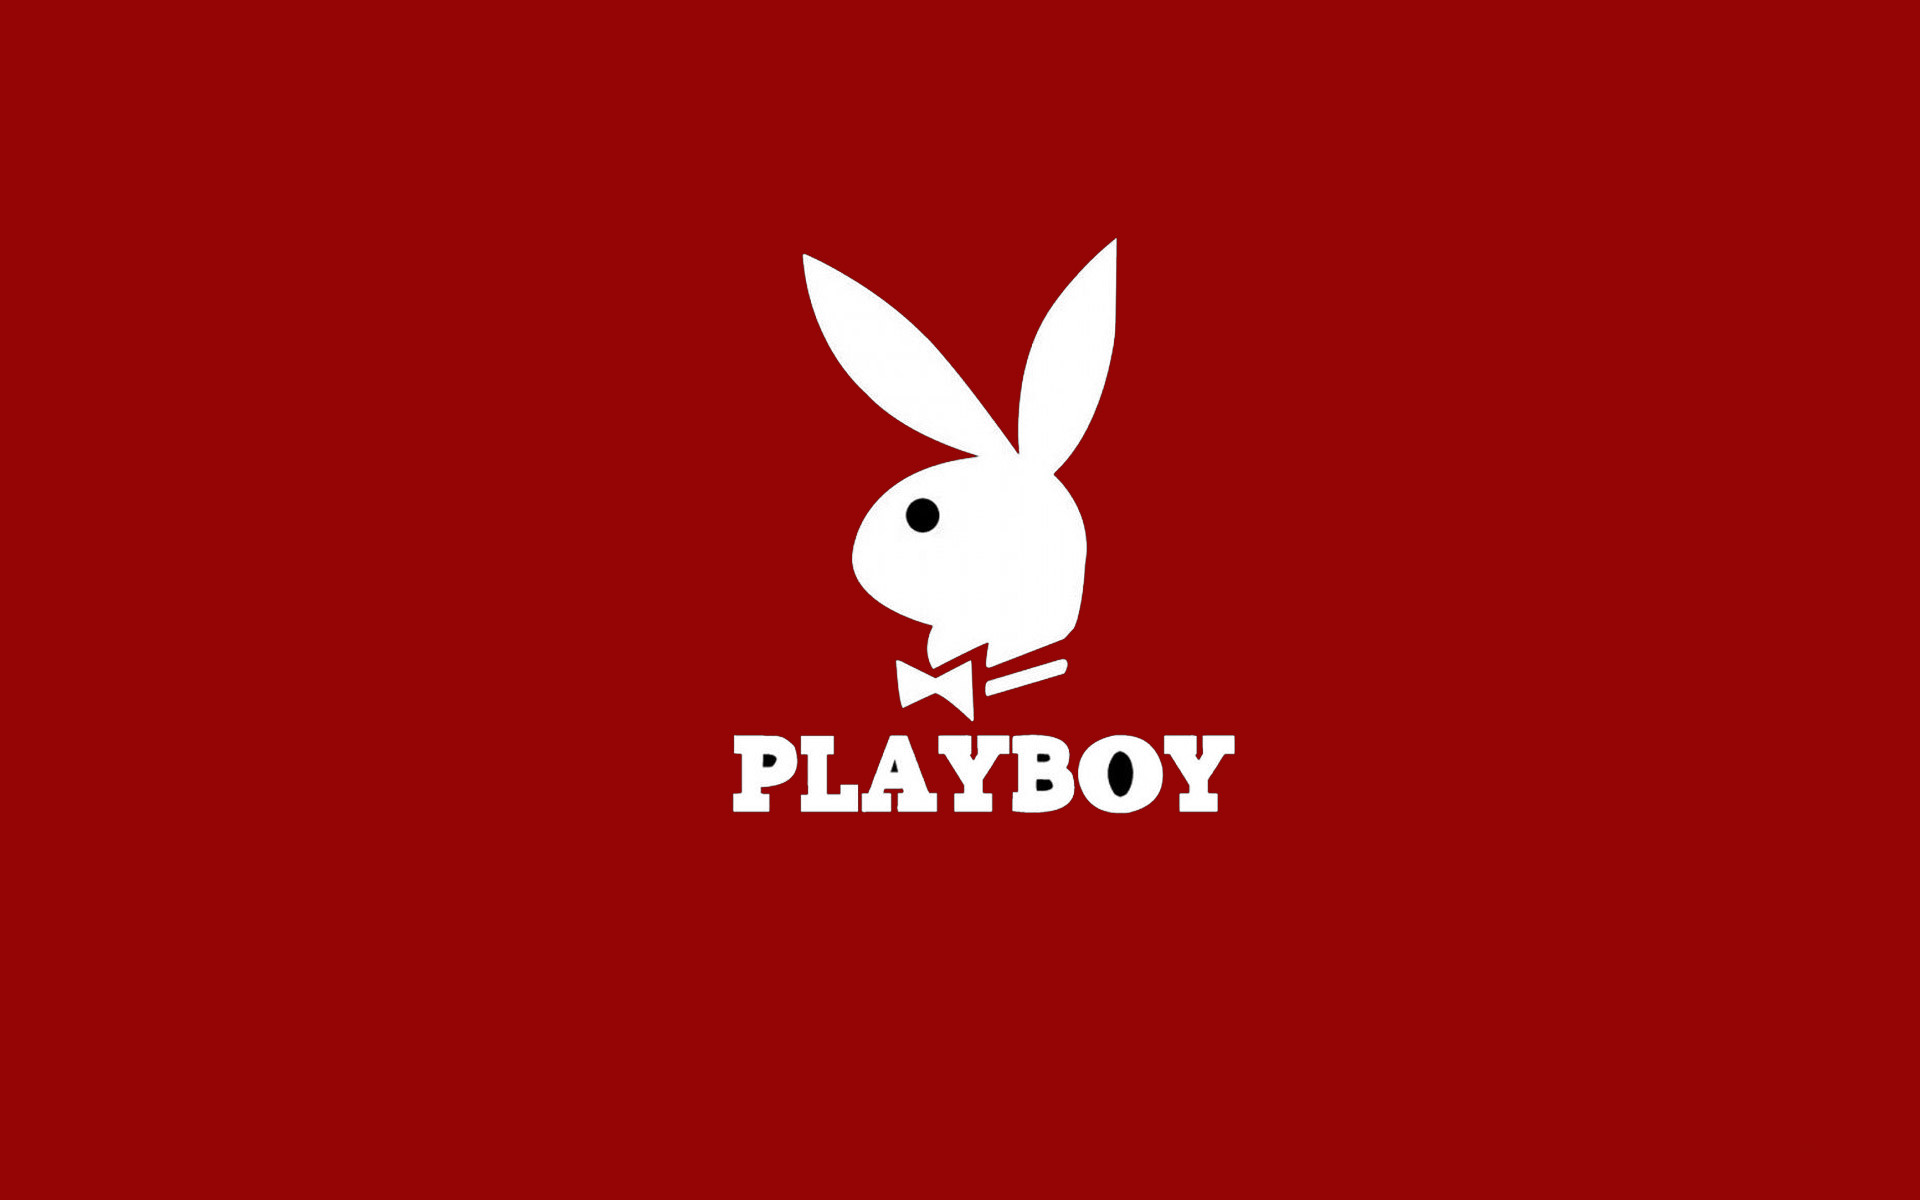 PlayBoy Three wallpapers and stock photos